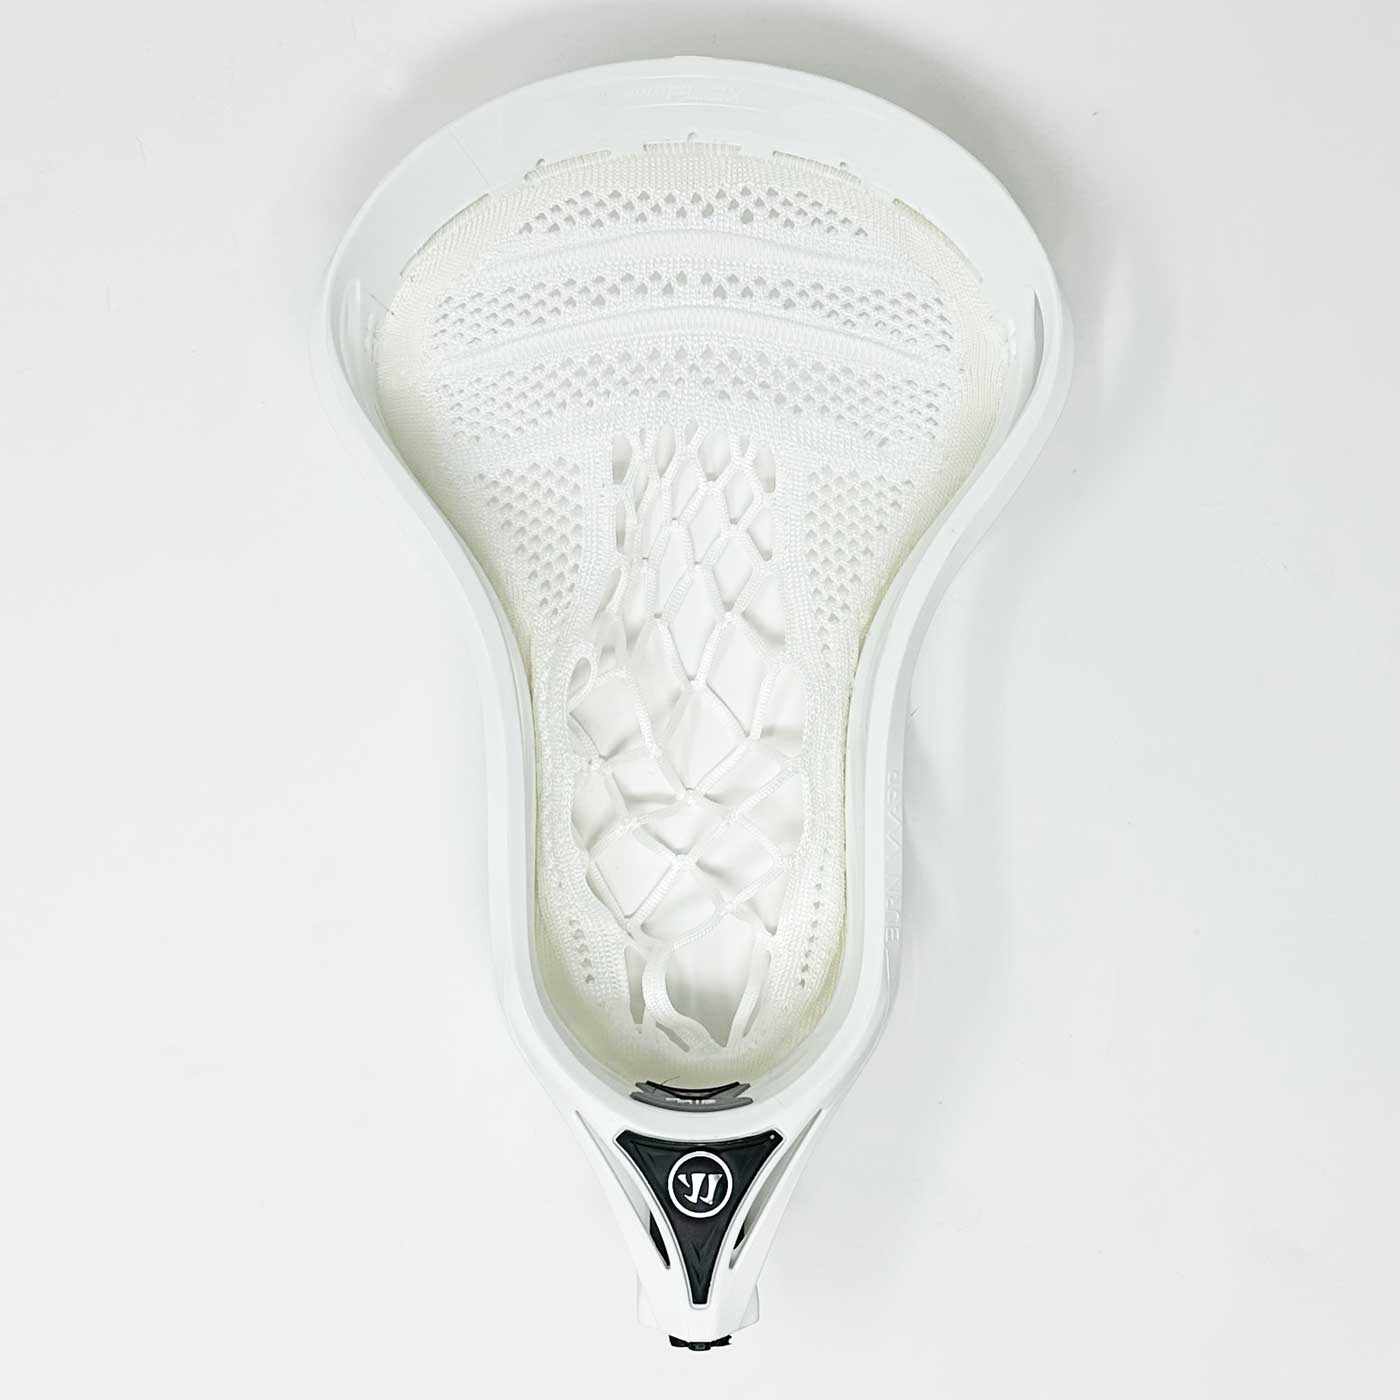 Picture of the front on the Warrior Burn Warp Pro Strung Lacrosse Head